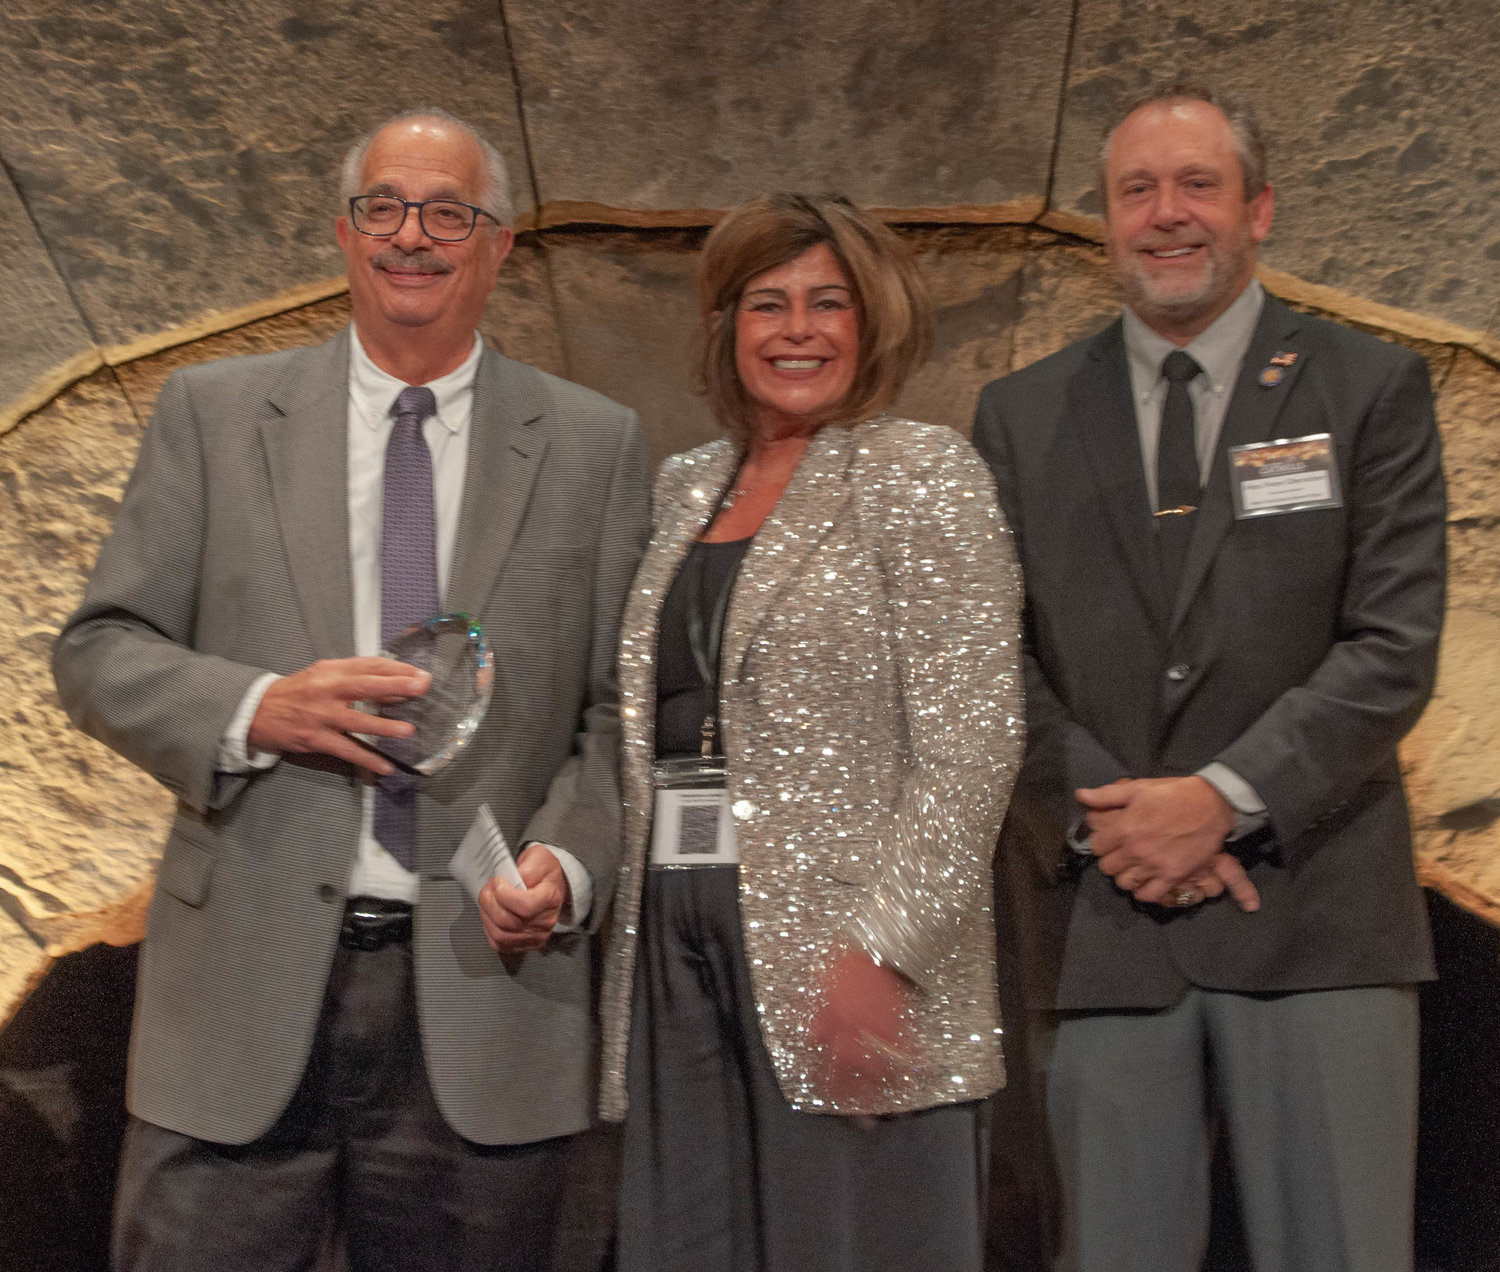 Paul Carlucci, left, seen here with SCVA president Roberta Byron-Lockwood and Sen. Peter Oberacker, received the STAR Award for individual achievement. The award honors his years of service as vice president of the Villa Roma Resort & Conference Center.  They were at the SCVA Hospitality Awards party held at Bethel Woods last week.